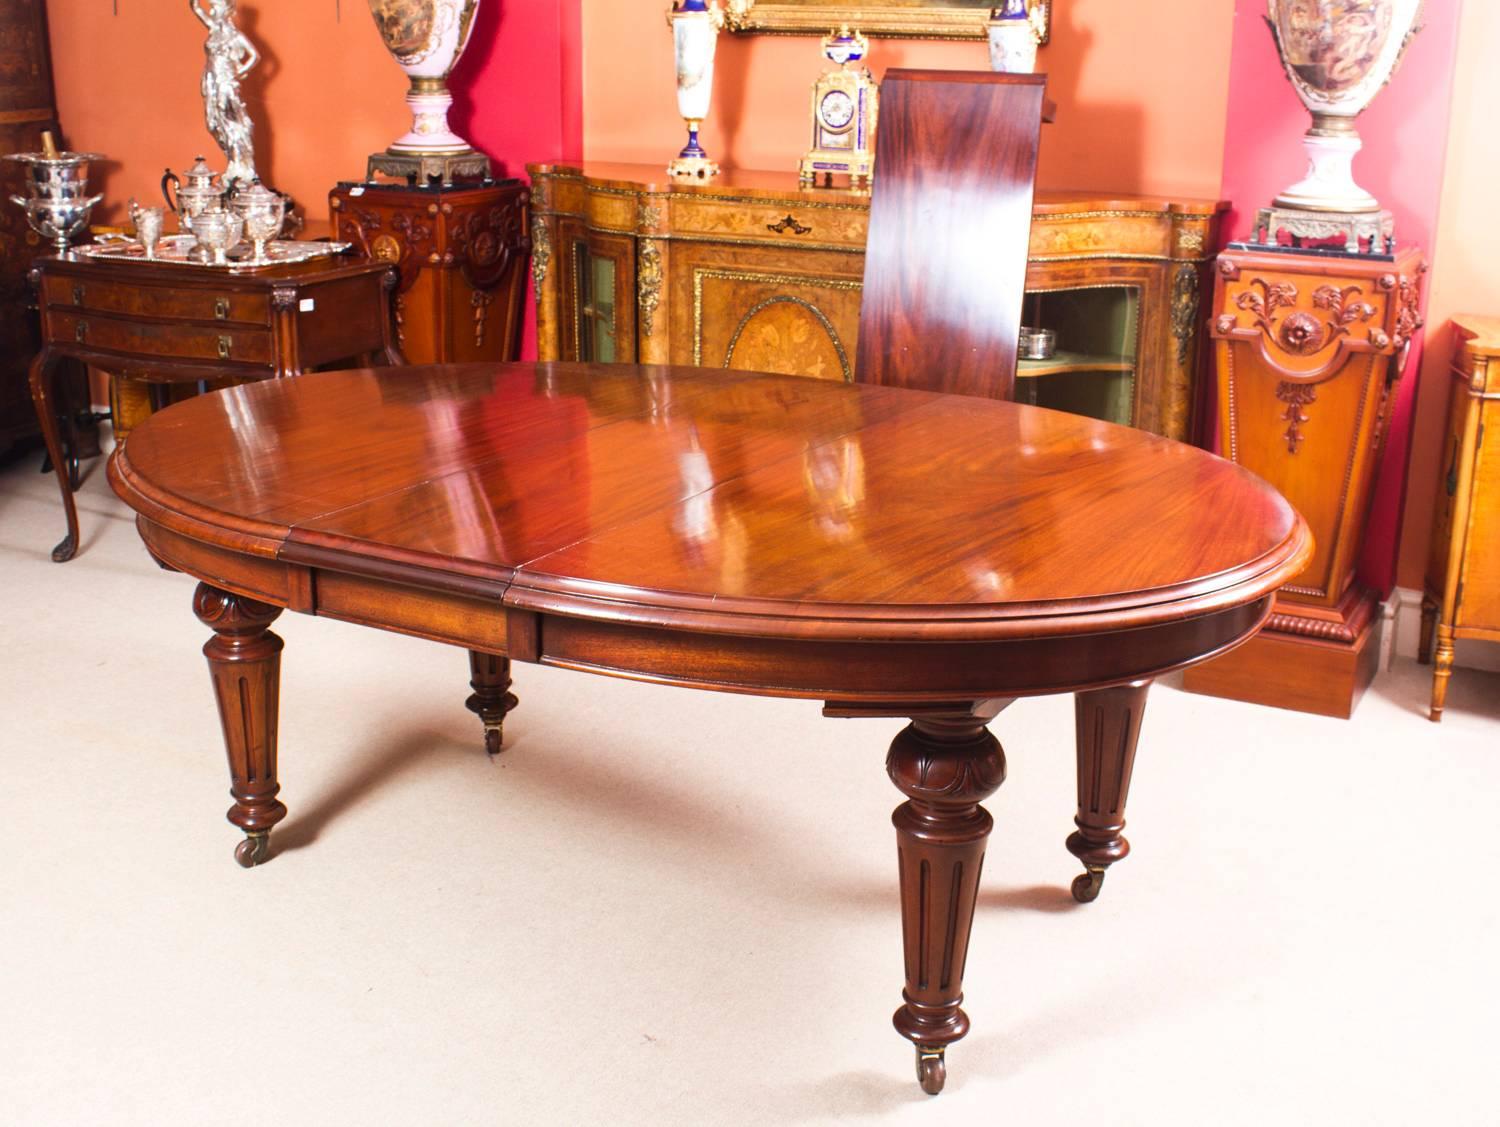 This is a fabulous antique Victorian oval solid mahogany extending dining table, circa 1860 in date.

The table has two original leaves, can comfortably seat eight and has been handcrafted from solid mahogany which has a beautiful grain and